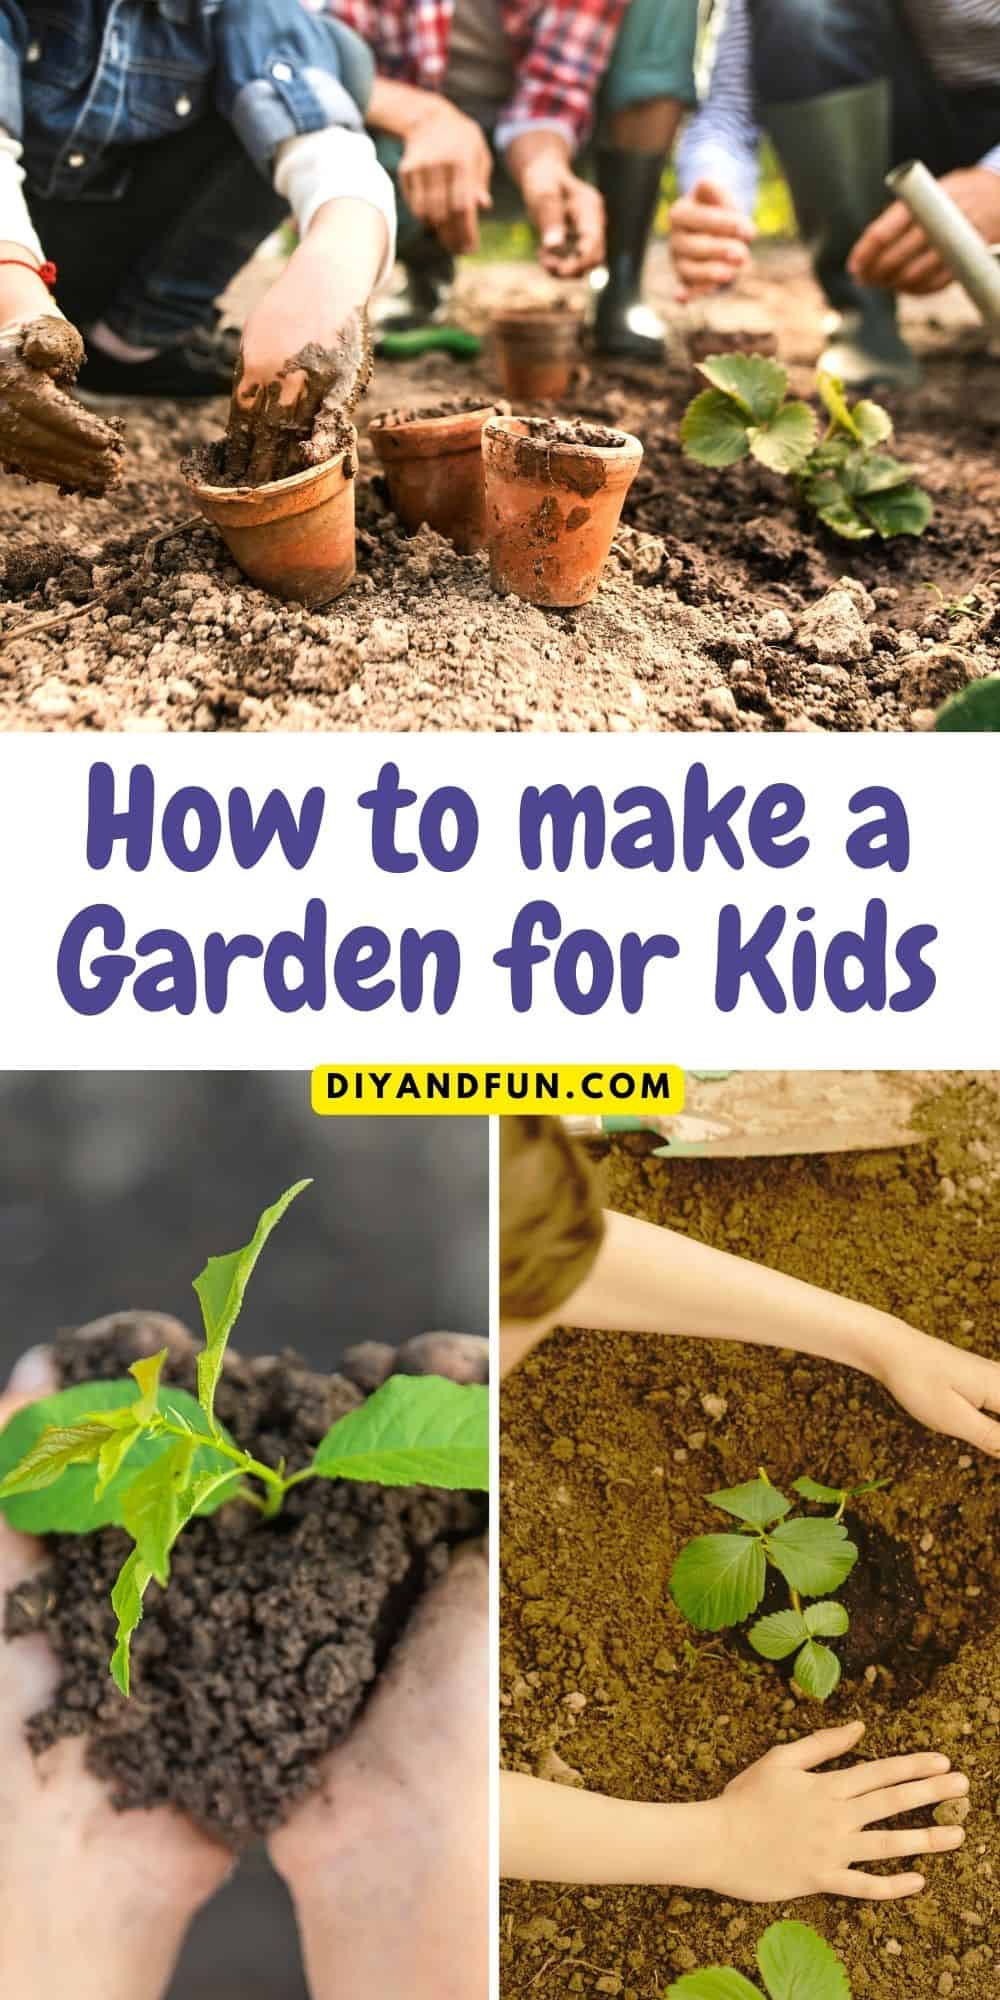 How to make a Garden for Kids, a simple guide for selecting, planting, and caring for beautiful plants with children of most ages.